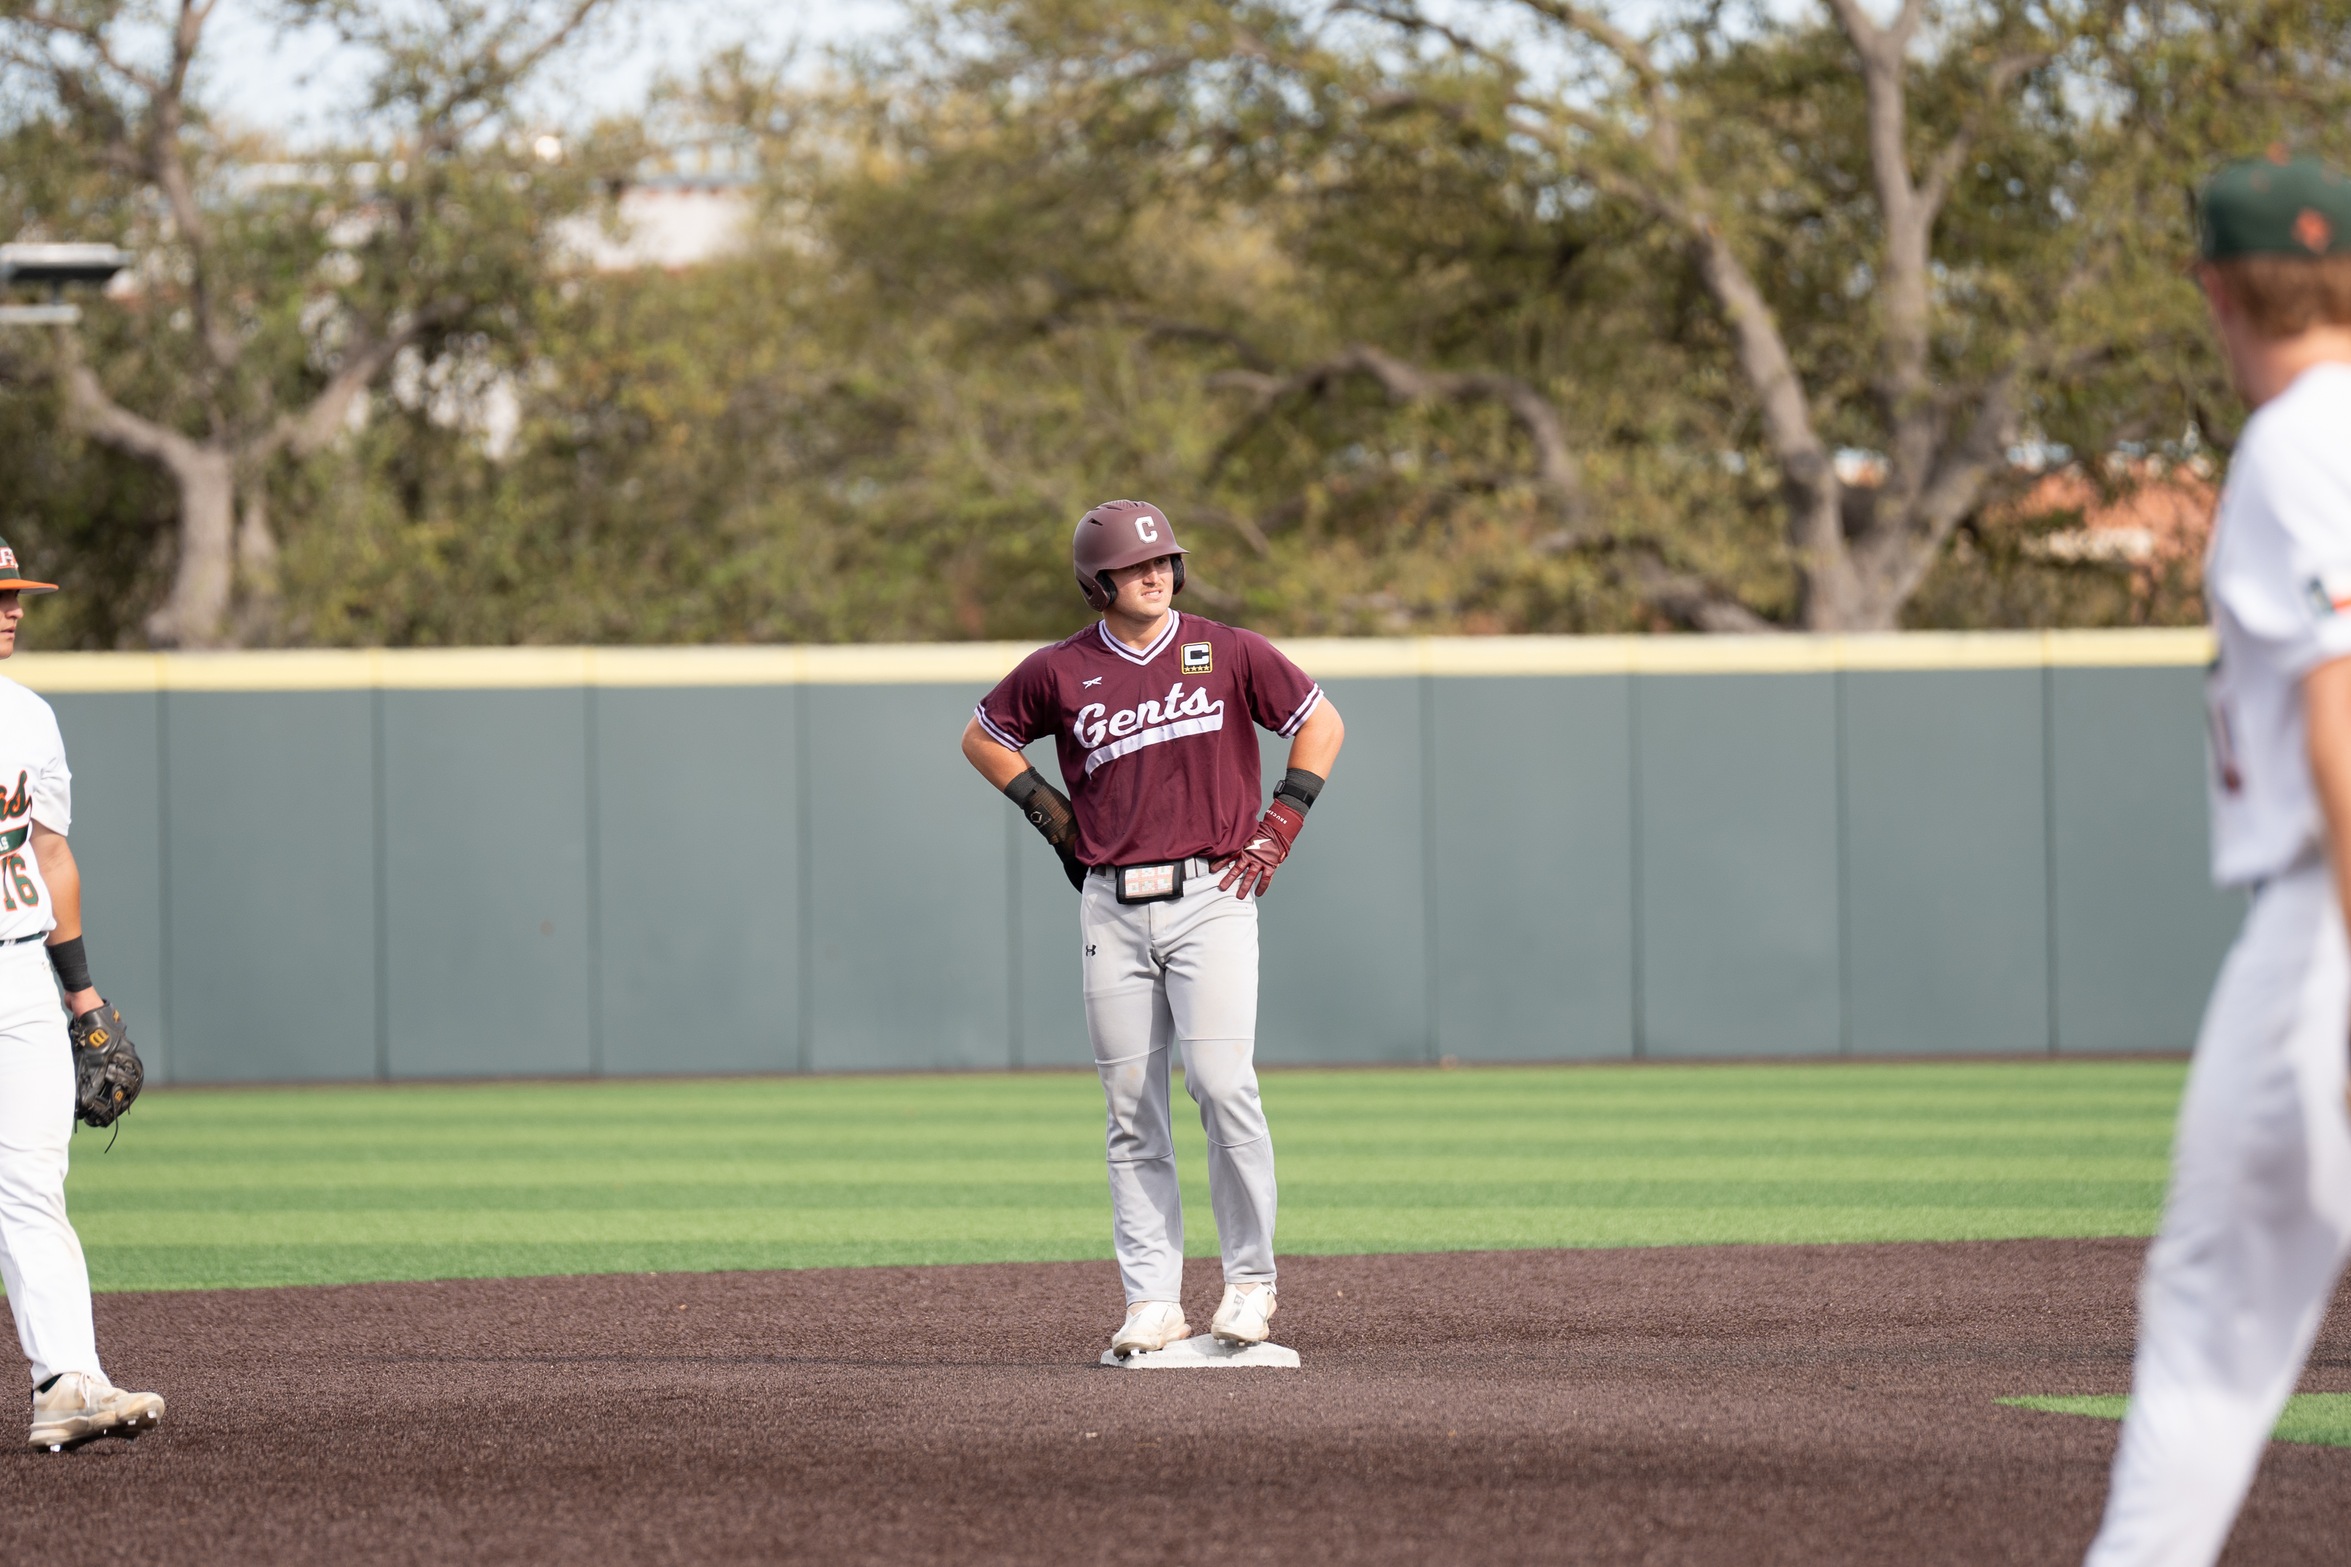 Centenary split a DH on Friday with Schreiner in Kerrville, Texas.